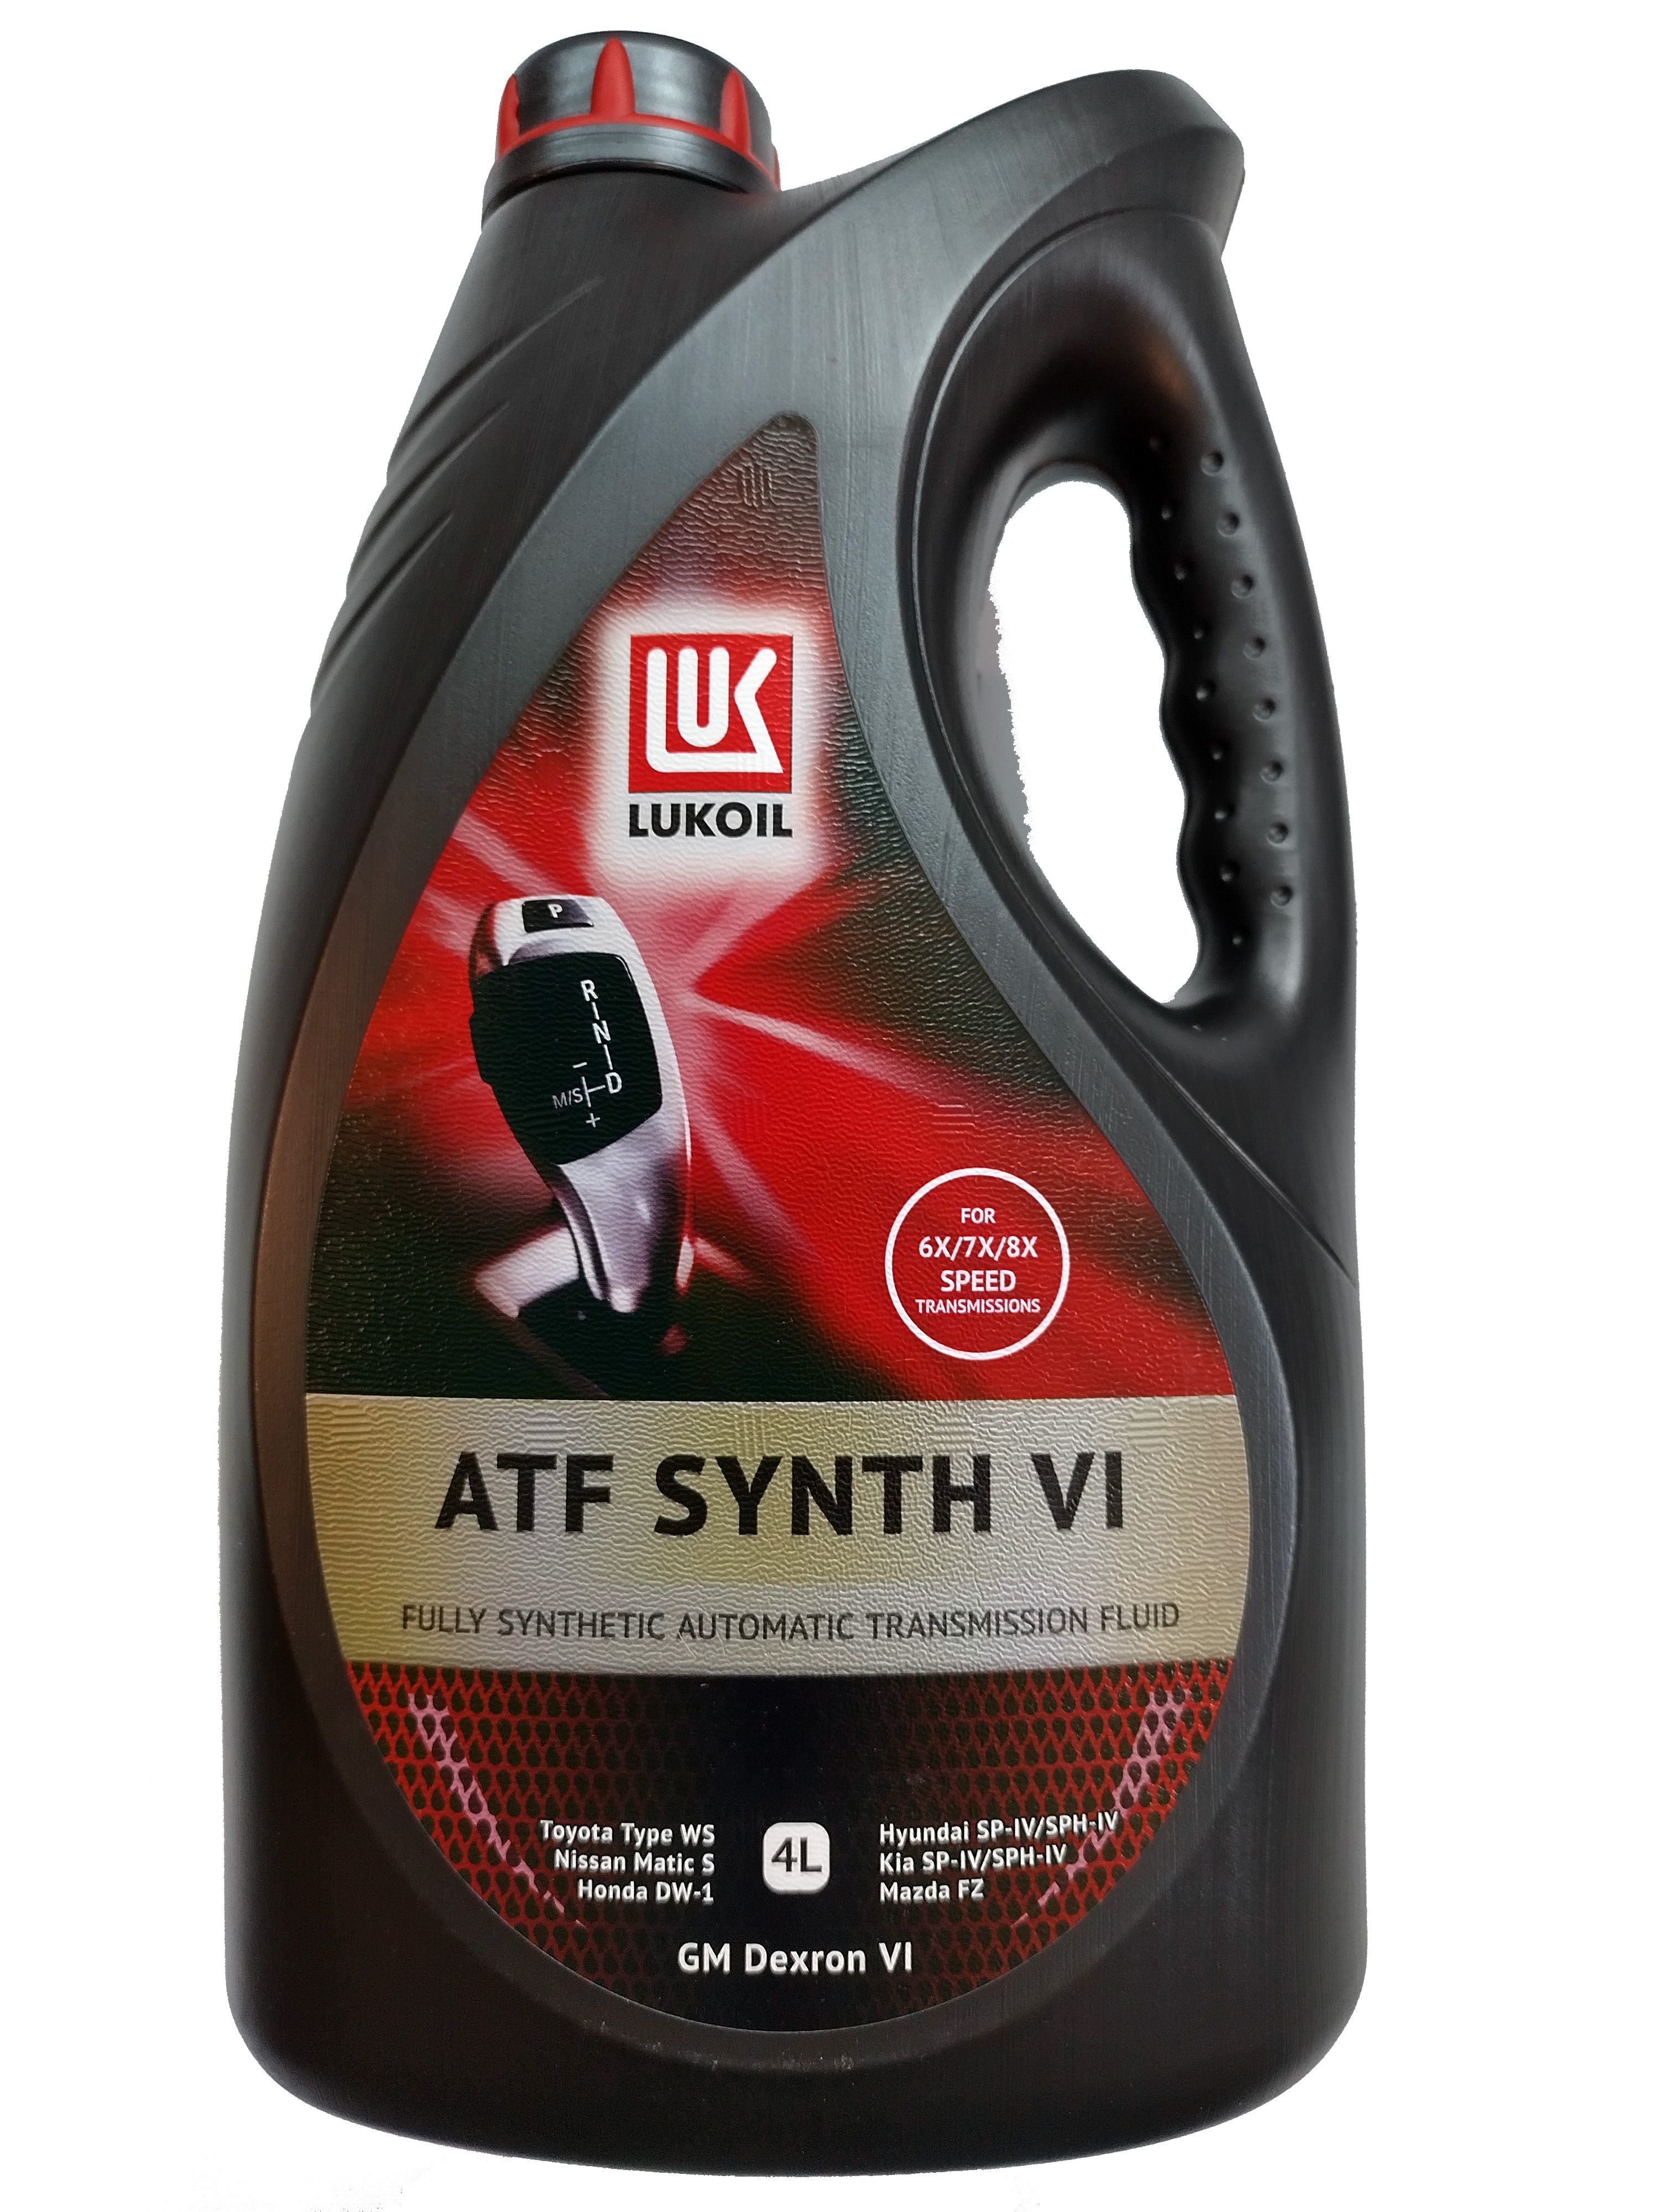 Лукойл ATF Synth vi. Масло Лукойл АТФ декстрон 6 4л. Lukoil ATF Synth 6 216. Лукойл ATF Synth Multi 4л. Лукойл synth vi